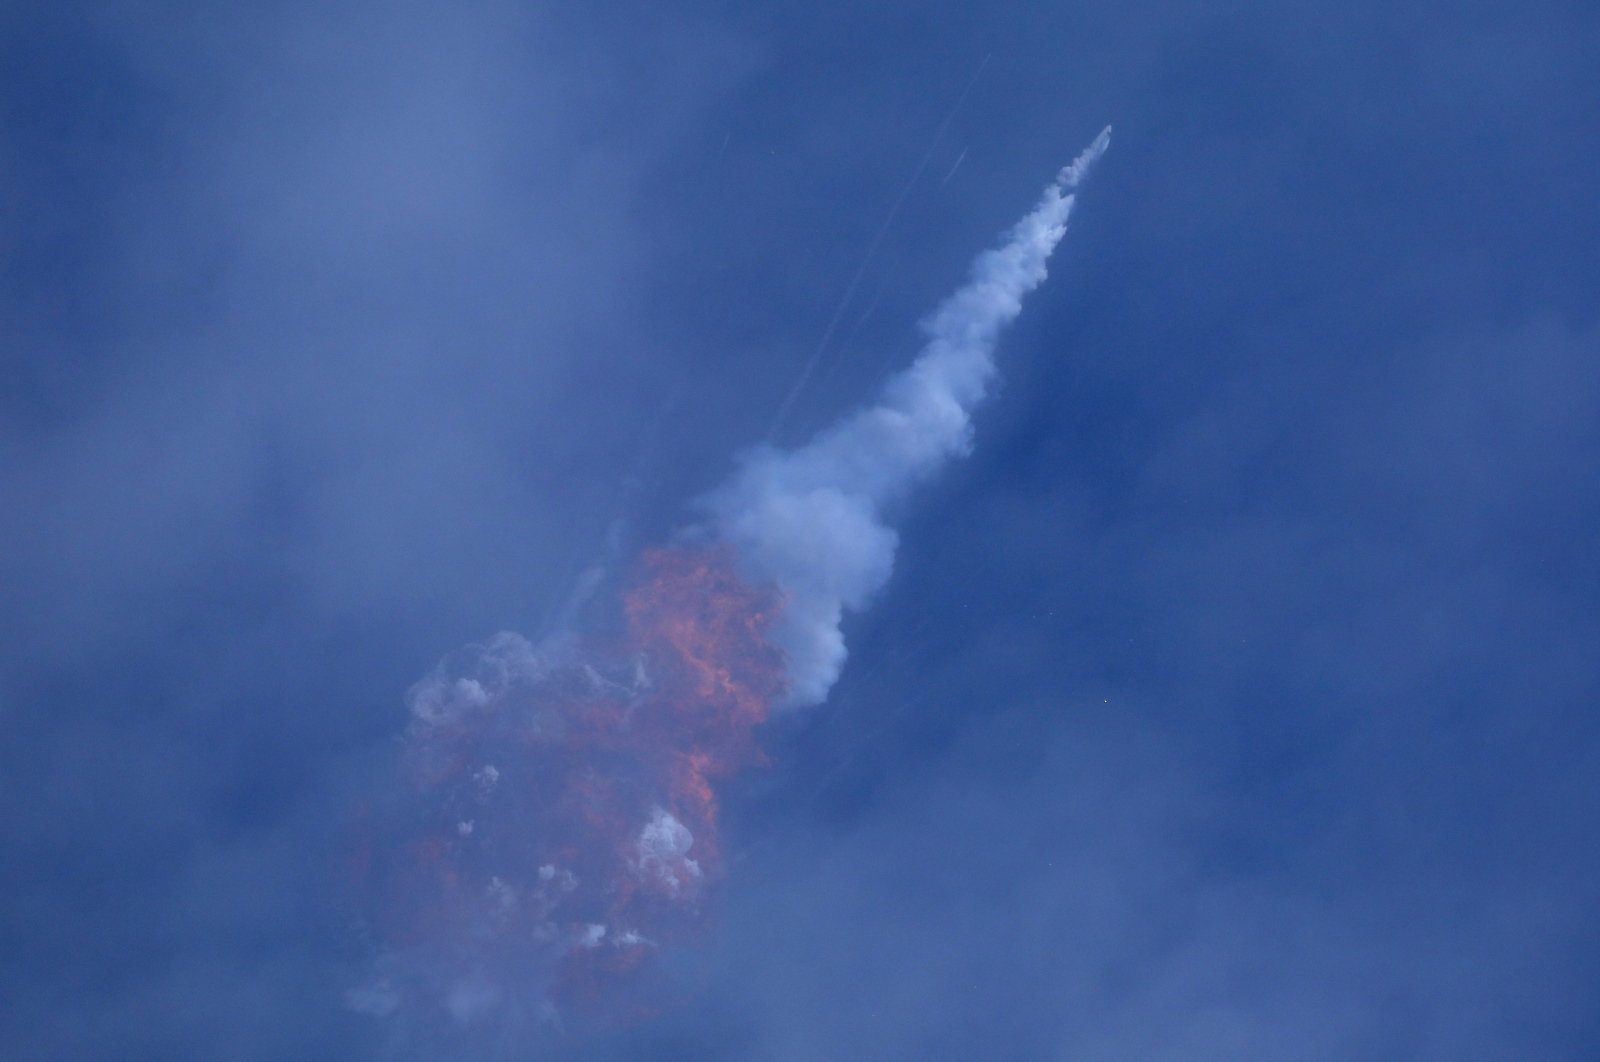 A SpaceX Falcon 9 rocket engine self-destructs after jettisoning the Crew Dragon astronaut capsule during an in-flight abort test after lift of from the Kennedy Space Center in Cape Canaveral A SpaceX Falcon 9 rocket engine self-destructs after jettisoning the Crew Dragon astronaut capsule during an in-flight abort test, a key milestone before flying humans in 2020 under NASA's commercial crew program, after lift off from the Kennedy Space Center in Cape Canaveral, Florida, U.S. January 19, 2020. REUTERS/Joe Rimkus Jr JOE RIMKUS JR